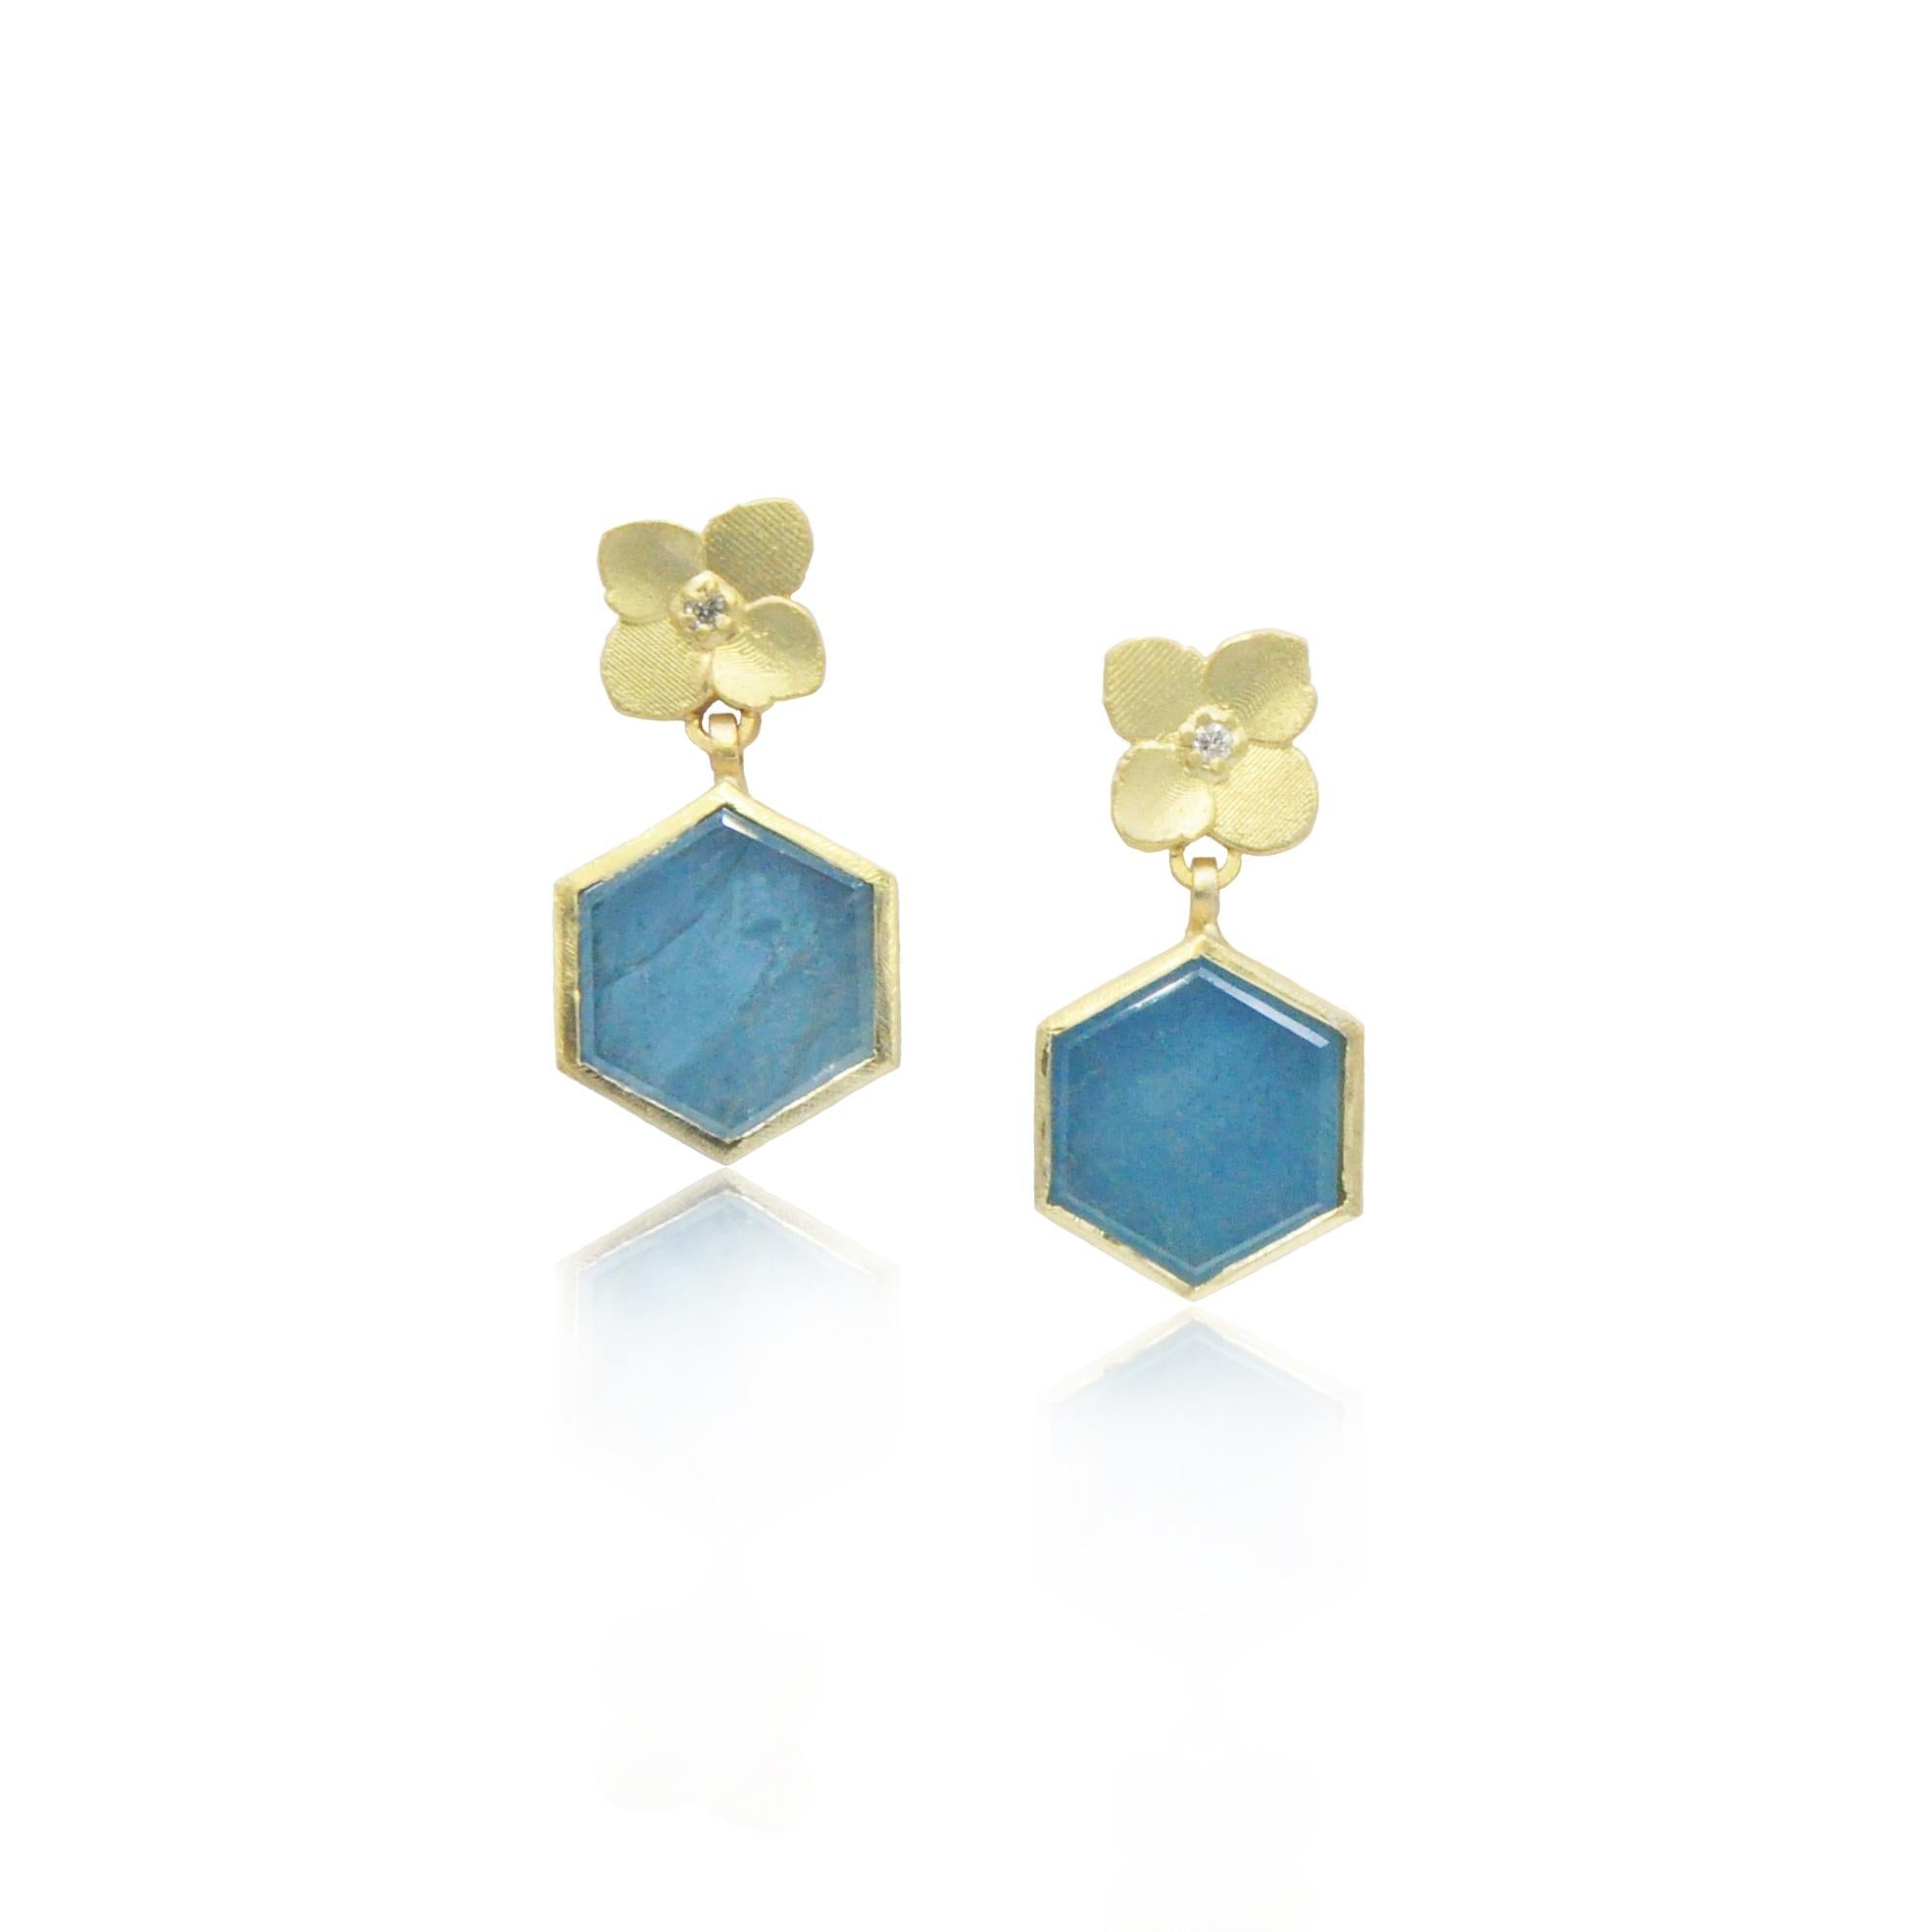 These lovely earrings evoke the beauty of spring. Delicate 18k gold hydrangea blossoms with diamond centers sit atop a watery blue aquamarine slice set in 18ky gold.

We offer several other hydrangea flower jewelry designs if you'd like to make it a